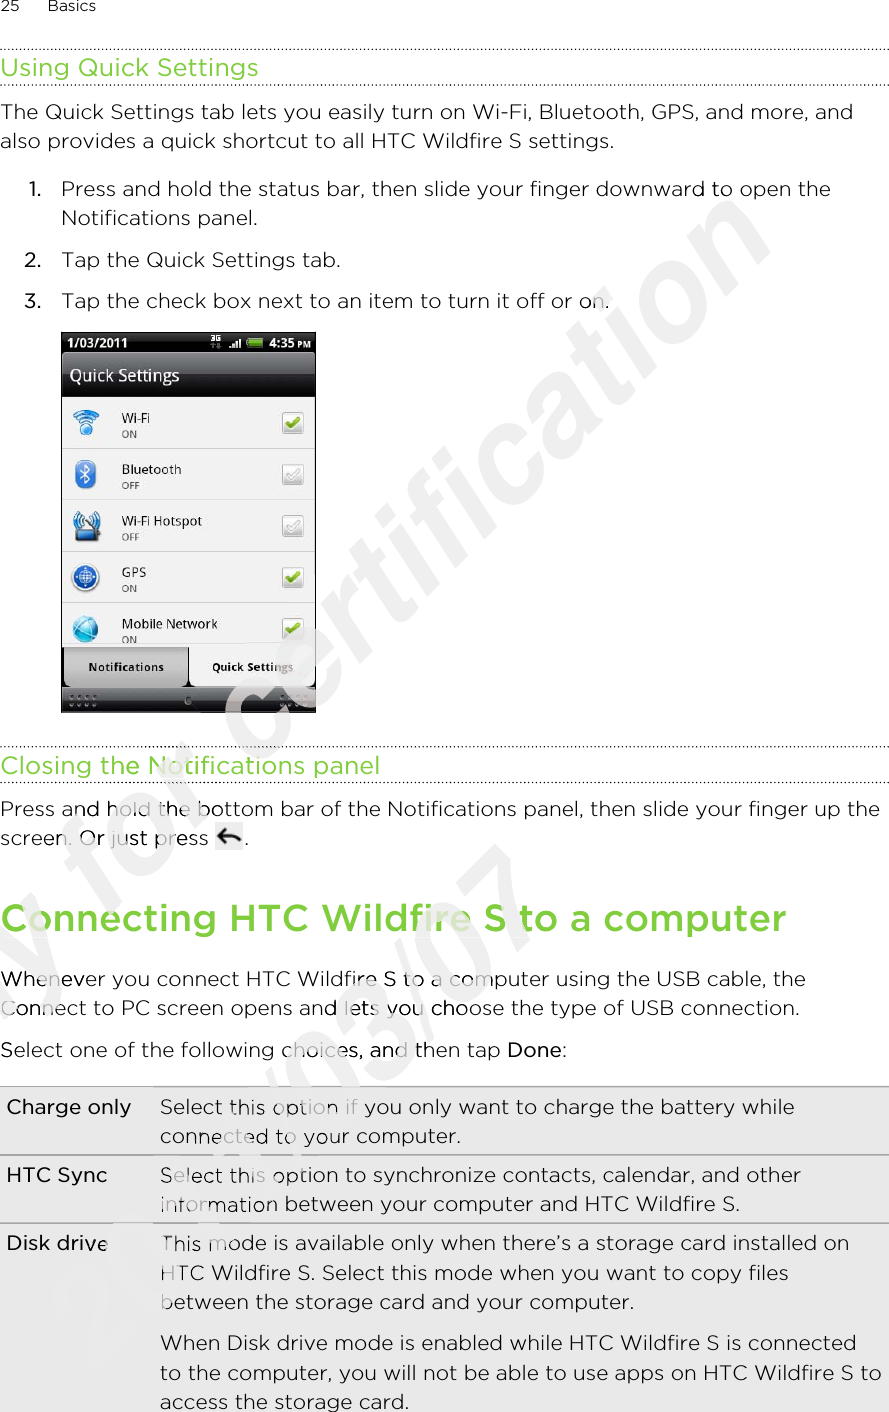 Using Quick SettingsThe Quick Settings tab lets you easily turn on Wi-Fi, Bluetooth, GPS, and more, andalso provides a quick shortcut to all HTC Wildfire S settings.1. Press and hold the status bar, then slide your finger downward to open theNotifications panel.2. Tap the Quick Settings tab.3. Tap the check box next to an item to turn it off or on. Closing the Notifications panelPress and hold the bottom bar of the Notifications panel, then slide your finger up thescreen. Or just press  .Connecting HTC Wildfire S to a computerWhenever you connect HTC Wildfire S to a computer using the USB cable, theConnect to PC screen opens and lets you choose the type of USB connection.Select one of the following choices, and then tap Done:Charge only Select this option if you only want to charge the battery whileconnected to your computer.HTC Sync Select this option to synchronize contacts, calendar, and otherinformation between your computer and HTC Wildfire S.Disk drive This mode is available only when there’s a storage card installed onHTC Wildfire S. Select this mode when you want to copy filesbetween the storage card and your computer.When Disk drive mode is enabled while HTC Wildfire S is connectedto the computer, you will not be able to use apps on HTC Wildfire S toaccess the storage card.25 BasicsOnly Connecting HTC Wildfire S to a computerOnly Connecting HTC Wildfire S to a computerWhenever you connect HTC Wildfire S to a computer using the USB cable, theOnly Whenever you connect HTC Wildfire S to a computer using the USB cable, theConnect to PC screen opens and lets you choose the type of USB connection.Only Connect to PC screen opens and lets you choose the type of USB connection.Select one of the following choices, and then tap Only Select one of the following choices, and then tap for Closing the Notifications panelfor Closing the Notifications panelfor for for Press and hold the bottom bar of the Notifications panel, then slide your finger up thefor Press and hold the bottom bar of the Notifications panel, then slide your finger up thescreen. Or just press for screen. Or just press Connecting HTC Wildfire S to a computerfor Connecting HTC Wildfire S to a computercertification Press and hold the status bar, then slide your finger downward to open thecertification Press and hold the status bar, then slide your finger downward to open theTap the check box next to an item to turn it off or on. certification Tap the check box next to an item to turn it off or on. certification certification certification Closing the Notifications panelcertification Closing the Notifications panelcertification 2011/03/07Connecting HTC Wildfire S to a computer2011/03/07Connecting HTC Wildfire S to a computerWhenever you connect HTC Wildfire S to a computer using the USB cable, the2011/03/07Whenever you connect HTC Wildfire S to a computer using the USB cable, theConnect to PC screen opens and lets you choose the type of USB connection.2011/03/07Connect to PC screen opens and lets you choose the type of USB connection.Select one of the following choices, and then tap 2011/03/07Select one of the following choices, and then tap 2011/03/07Select this option if you only want to charge the battery while2011/03/07Select this option if you only want to charge the battery whileconnected to your computer.2011/03/07connected to your computer.2011/03/072011/03/07Select this option to synchronize contacts, calendar, and other2011/03/07Select this option to synchronize contacts, calendar, and otherinformation between your computer and HTC Wildfire S.2011/03/07information between your computer and HTC Wildfire S.2011/03/072011/03/072011/03/07Disk drive2011/03/07Disk driveThis mode is available only when there’s a storage card installed on2011/03/07This mode is available only when there’s a storage card installed onHTC Wildfire S. Select this mode when you want to copy files2011/03/07HTC Wildfire S. Select this mode when you want to copy filesbetween the storage card and your computer.2011/03/07between the storage card and your computer.2011/03/07